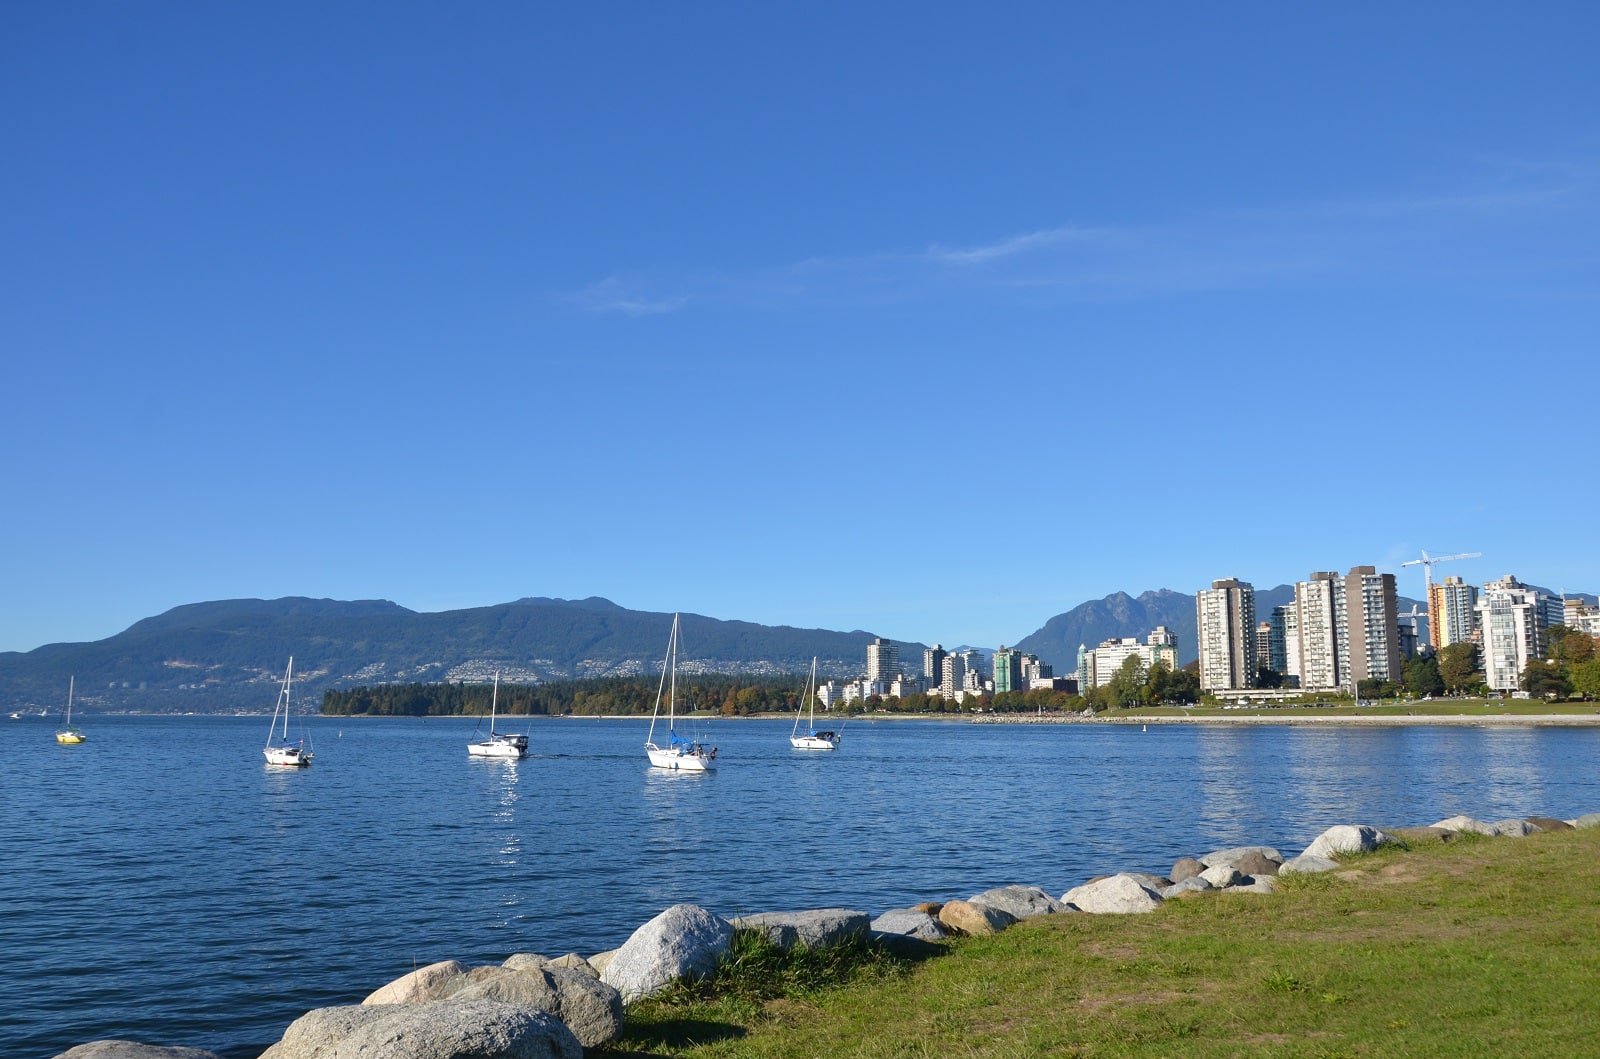 <p><span>Vancouver’s scenic coastline and diverse marine environments make it a fantastic location for learning to sail. The city’s sailing schools provide courses in the sheltered waters of English Bay and the Strait of Georgia.</span></p> <p><b>Insider’s Tip: </b><span>Take a sailing trip around the Gulf Islands for an unforgettable experience.</span></p> <p><b>When to Travel: </b><span>May to September is the most favorable weather.</span></p> <p><b>How to Get There: </b><span>Fly directly to Vancouver International Airport.</span></p>